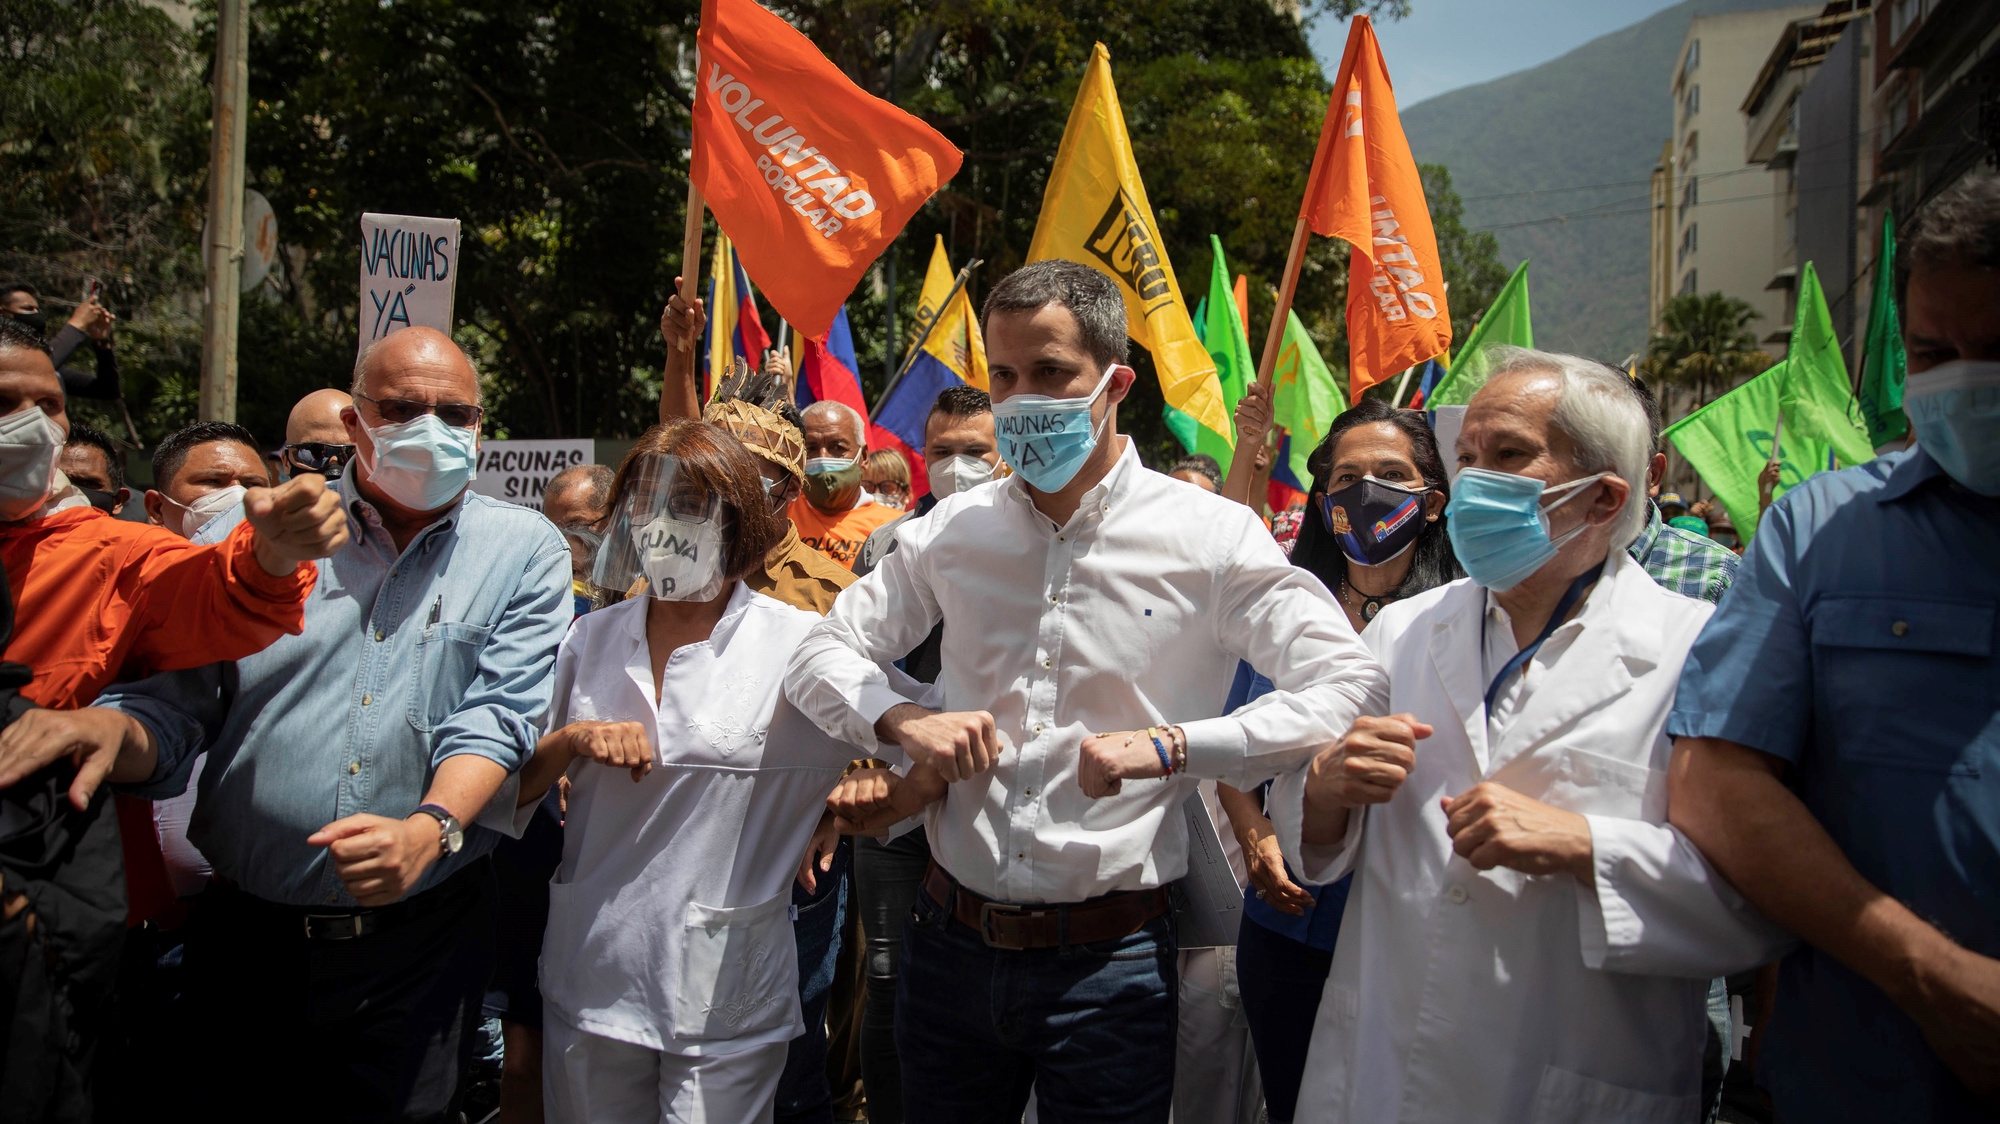 epa09142025 Venezuelan opposition leader Juan Guaido participates in a health workers march calling on authorities for providing COVID-19 vaccines in Caracas, Venezuela, 17 April 2021. Health workers and opposition leaders in Venezuela marched together, claiming a COVID-19 vaccination plan &#039;without political bias&#039; and placing health workers handling coronavirus patients first.  EPA/RAYNER PENA